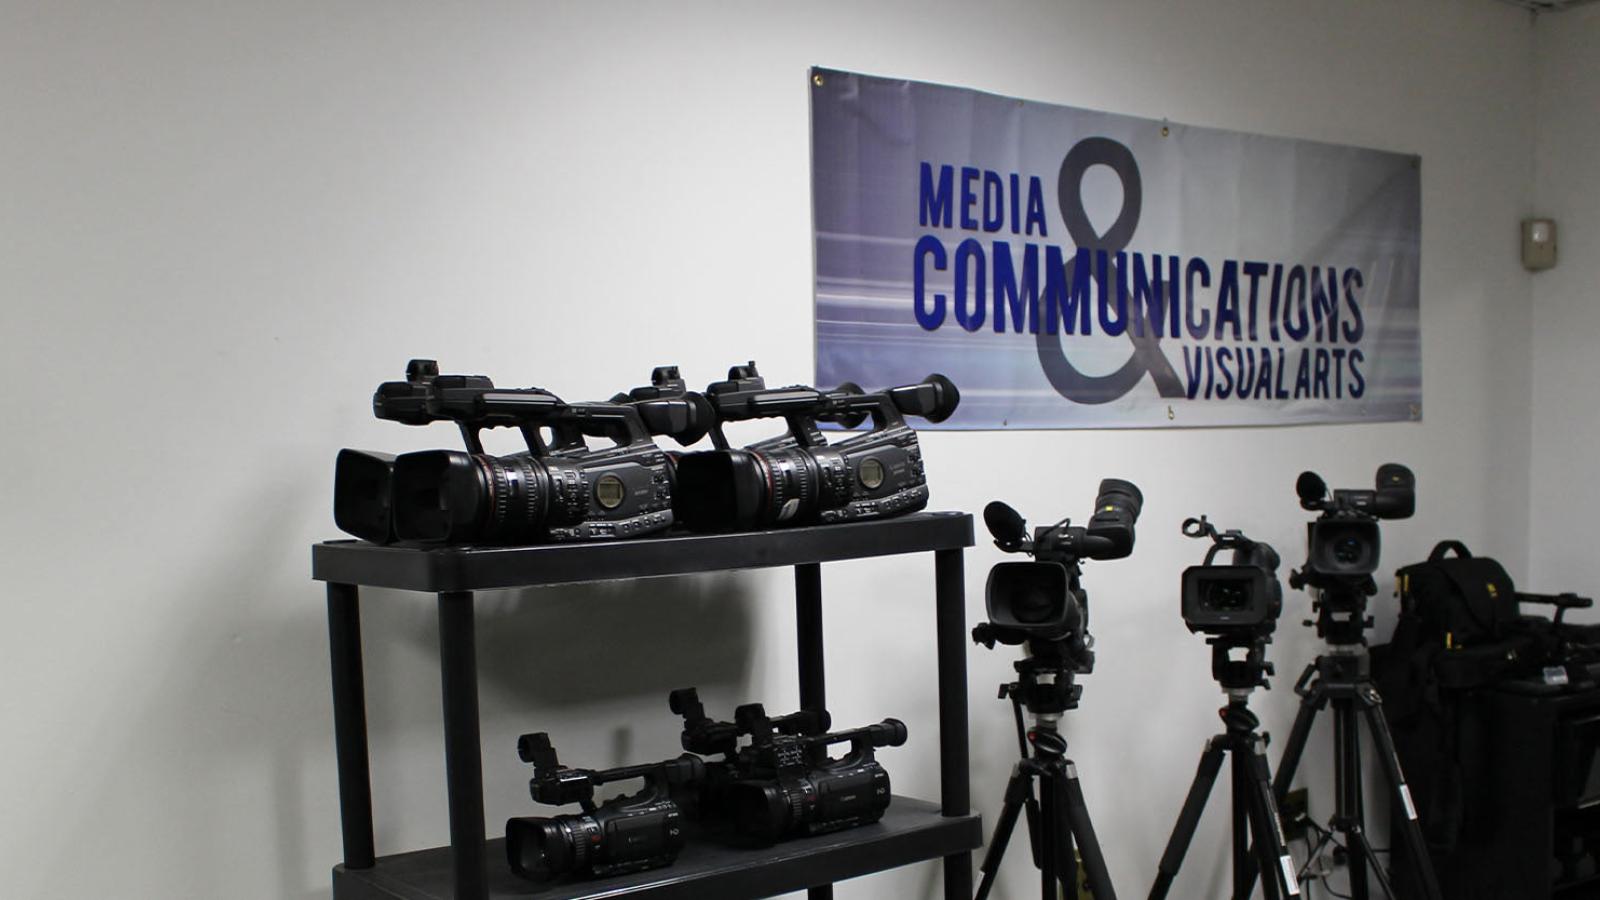 Video cameras in a storage room with a Media, Communications, and Visual Arts banner on the wall